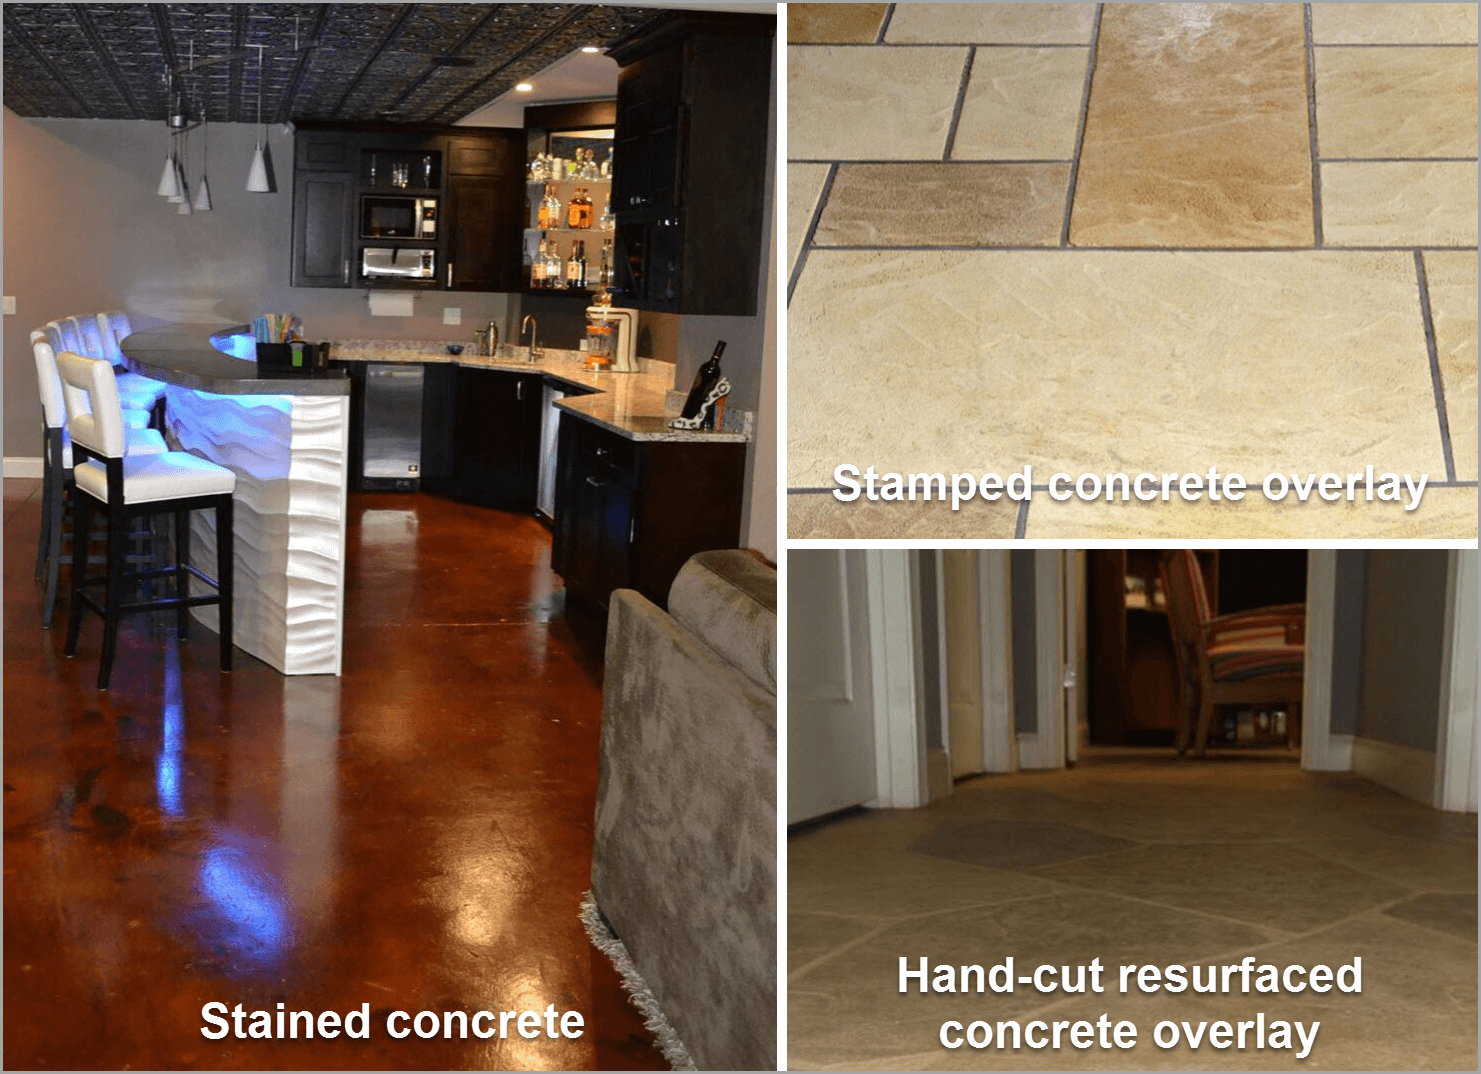 stained-stamped-hand-cut-resurfaced-concrete